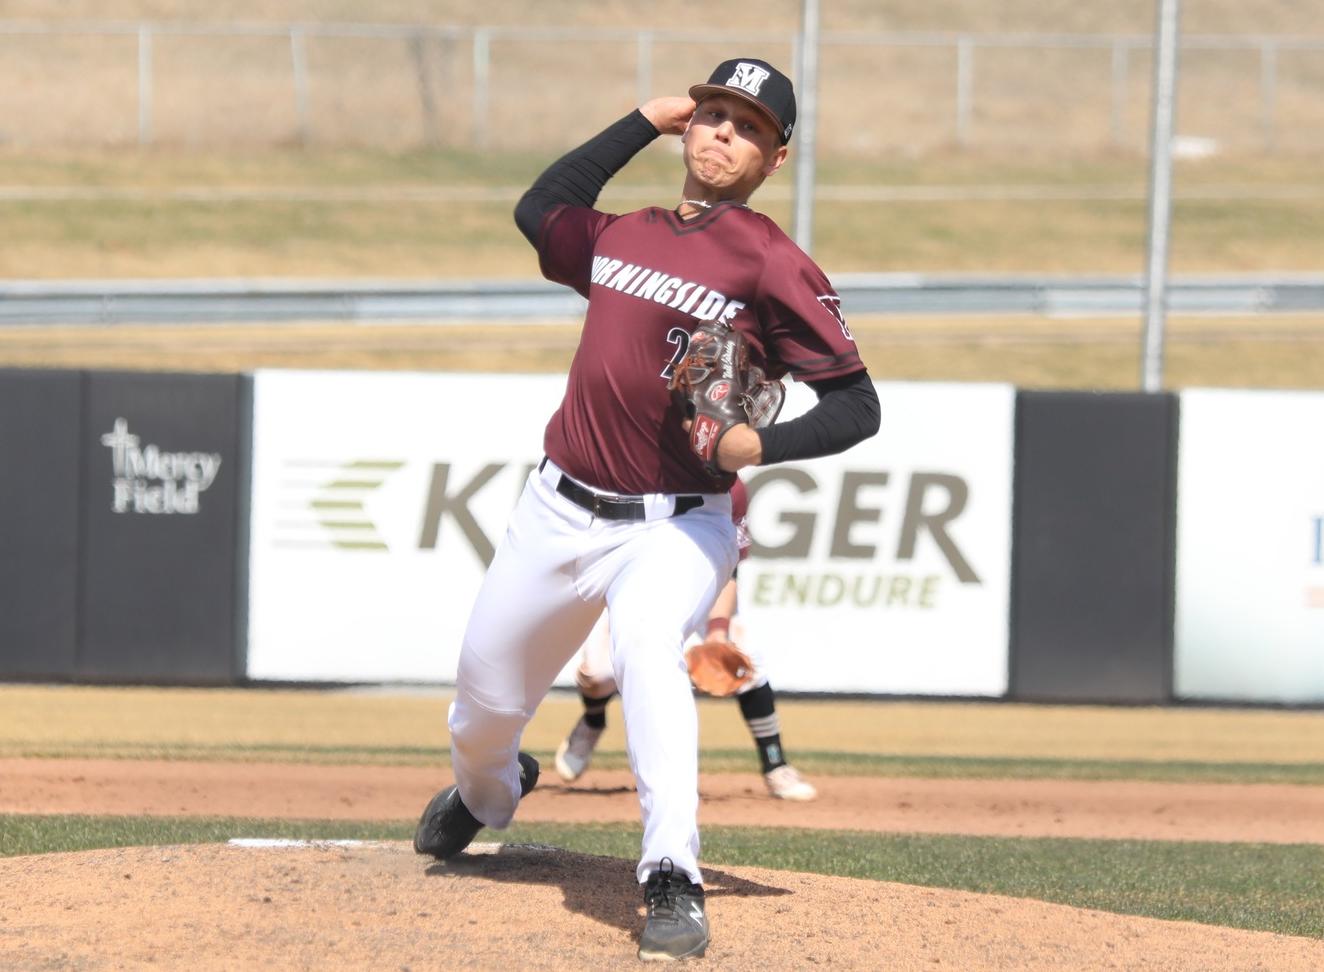 Picturesque Pitching – Mustangs begin final regular-season series with sweep